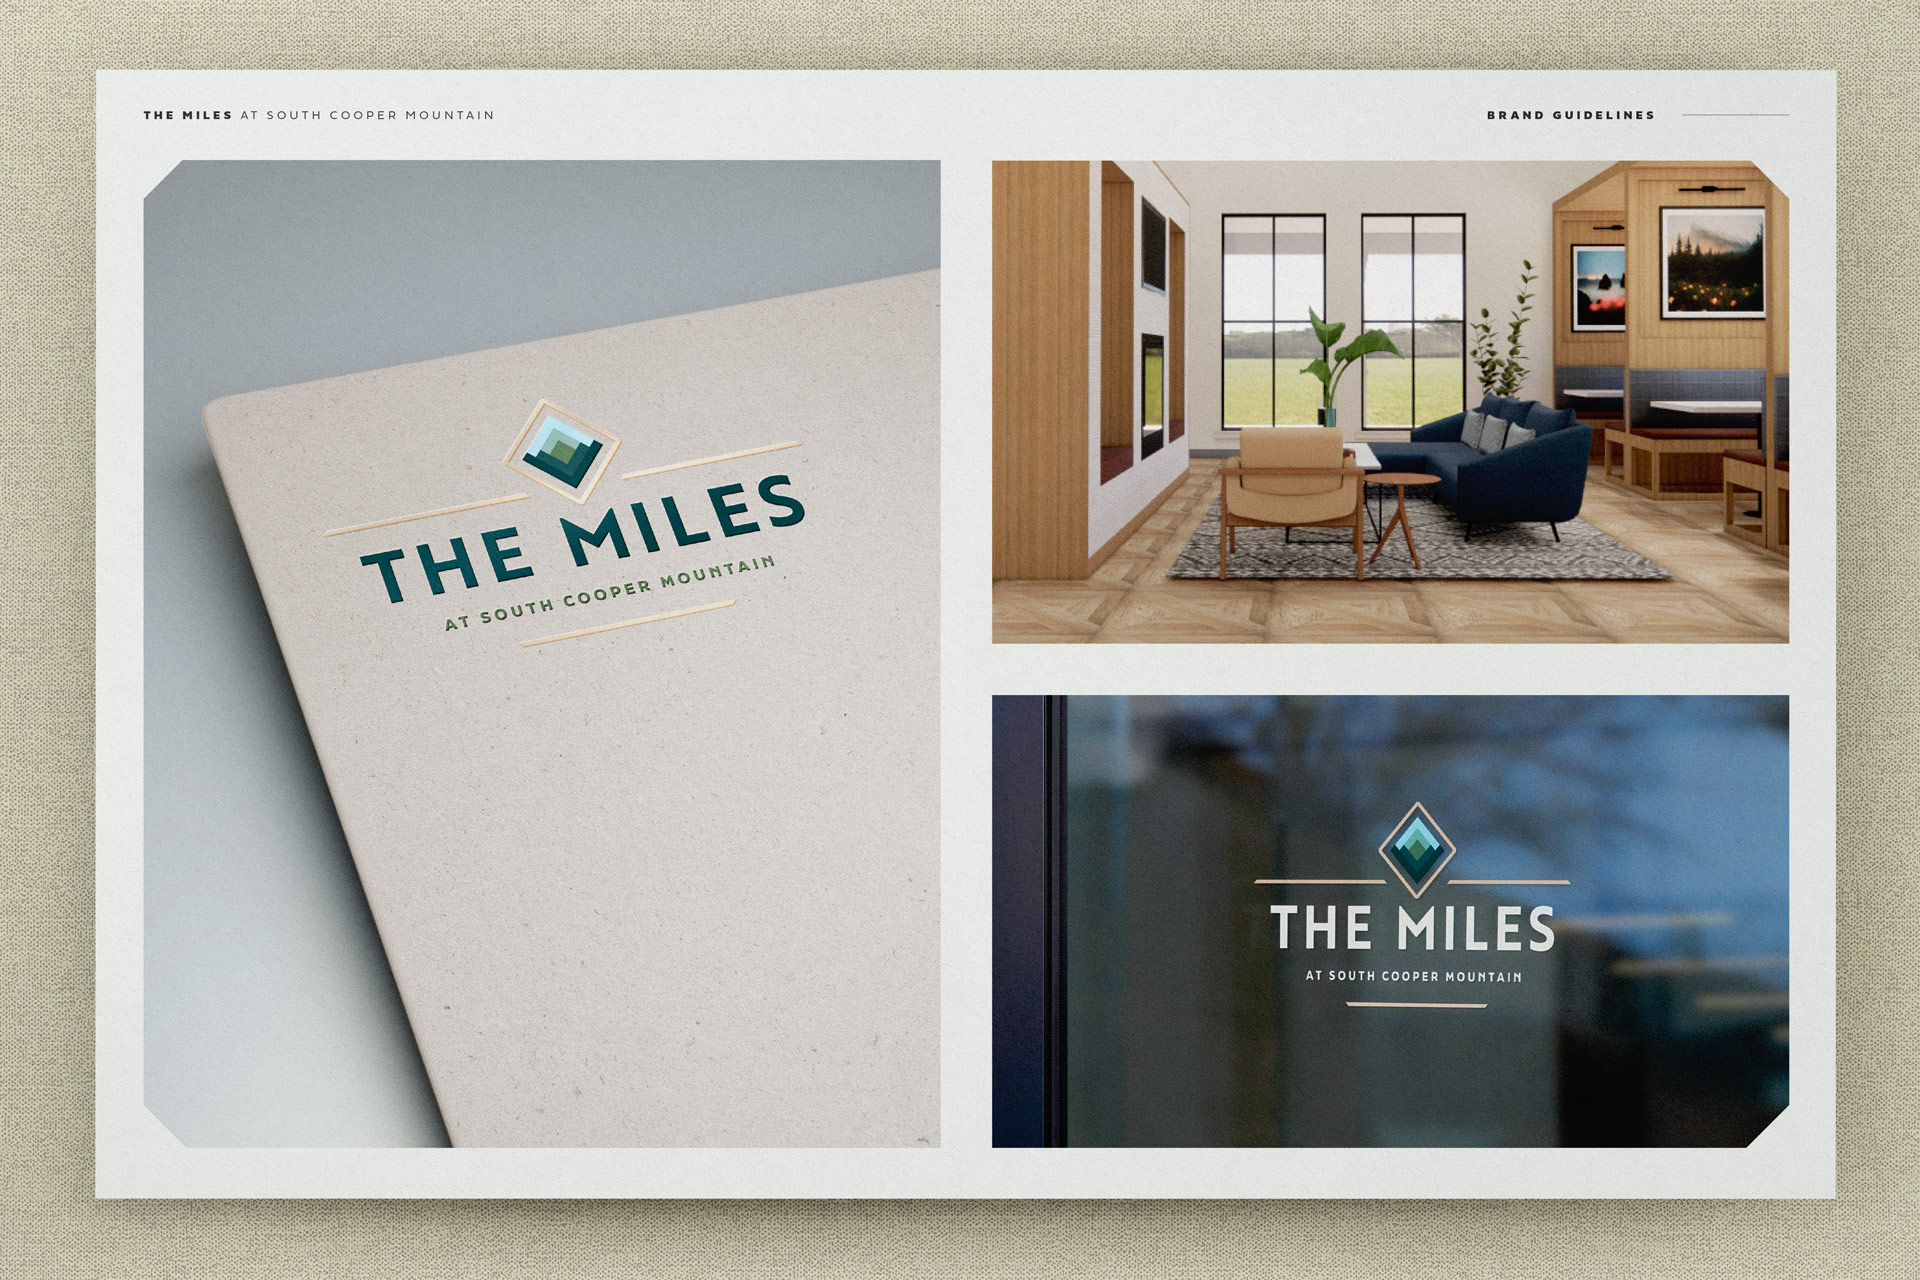 The Miles at South Cooper Mountain brand mockups showing a window and folder created by Incubate Design